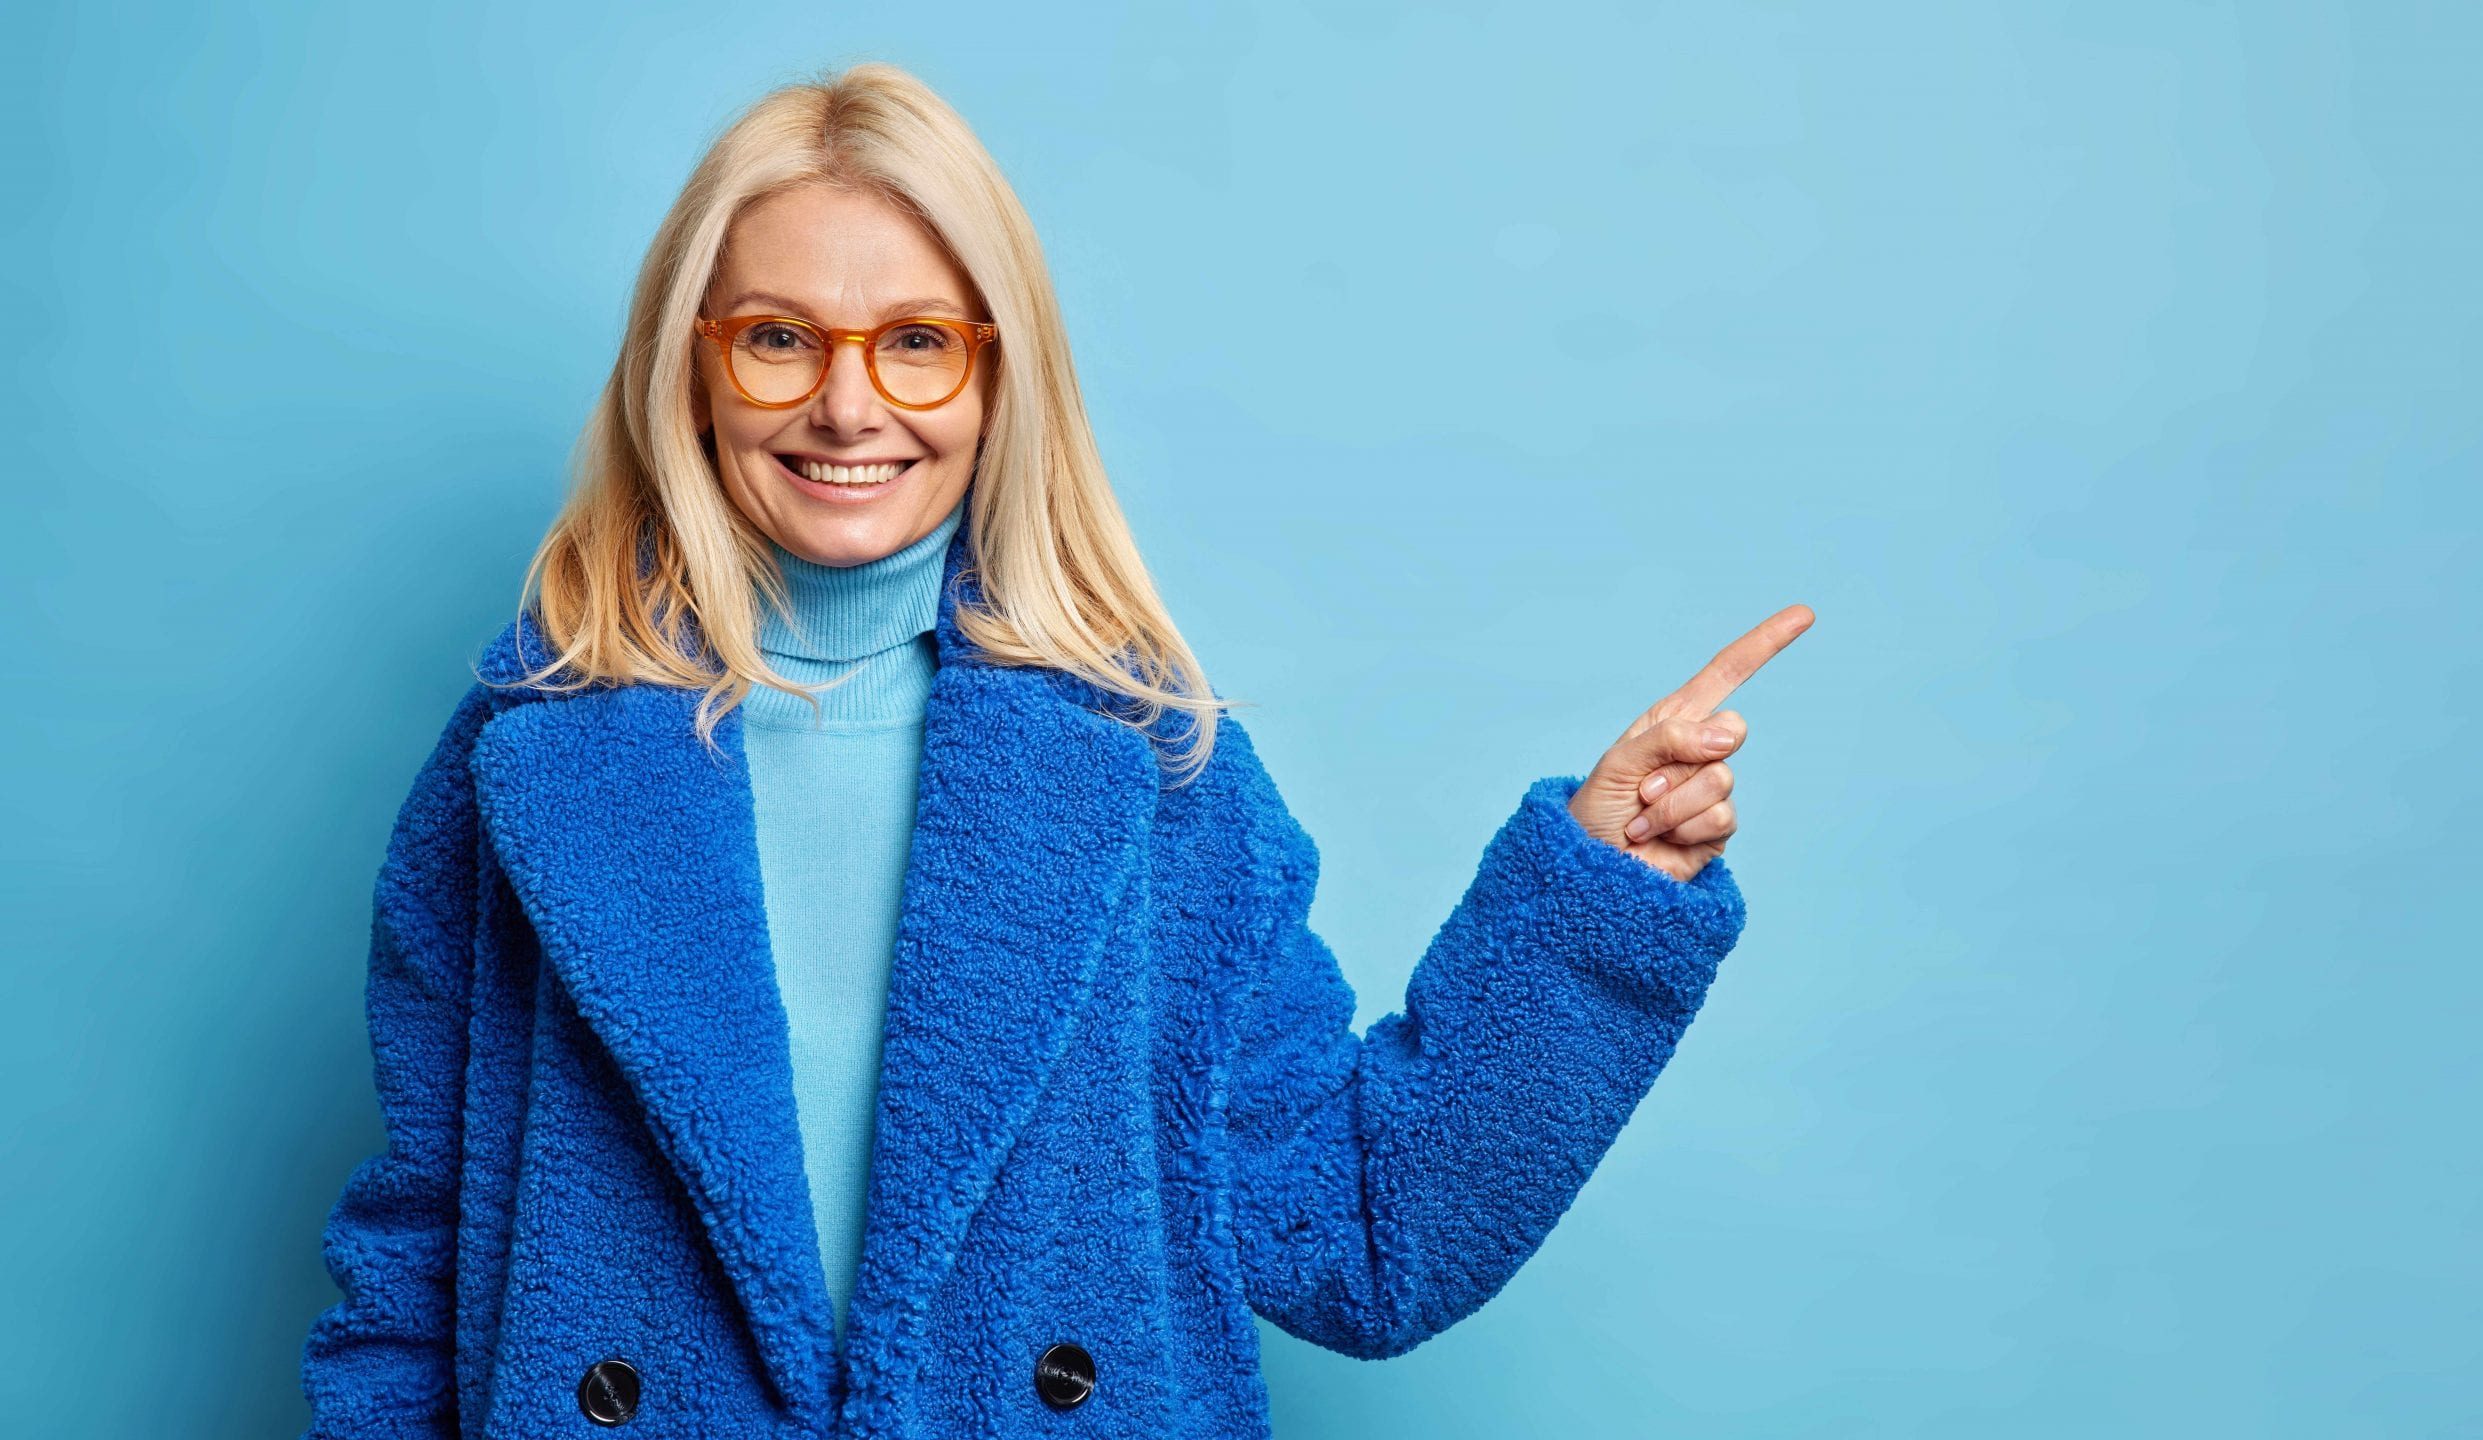 A smiling blonde woman in a blue coat